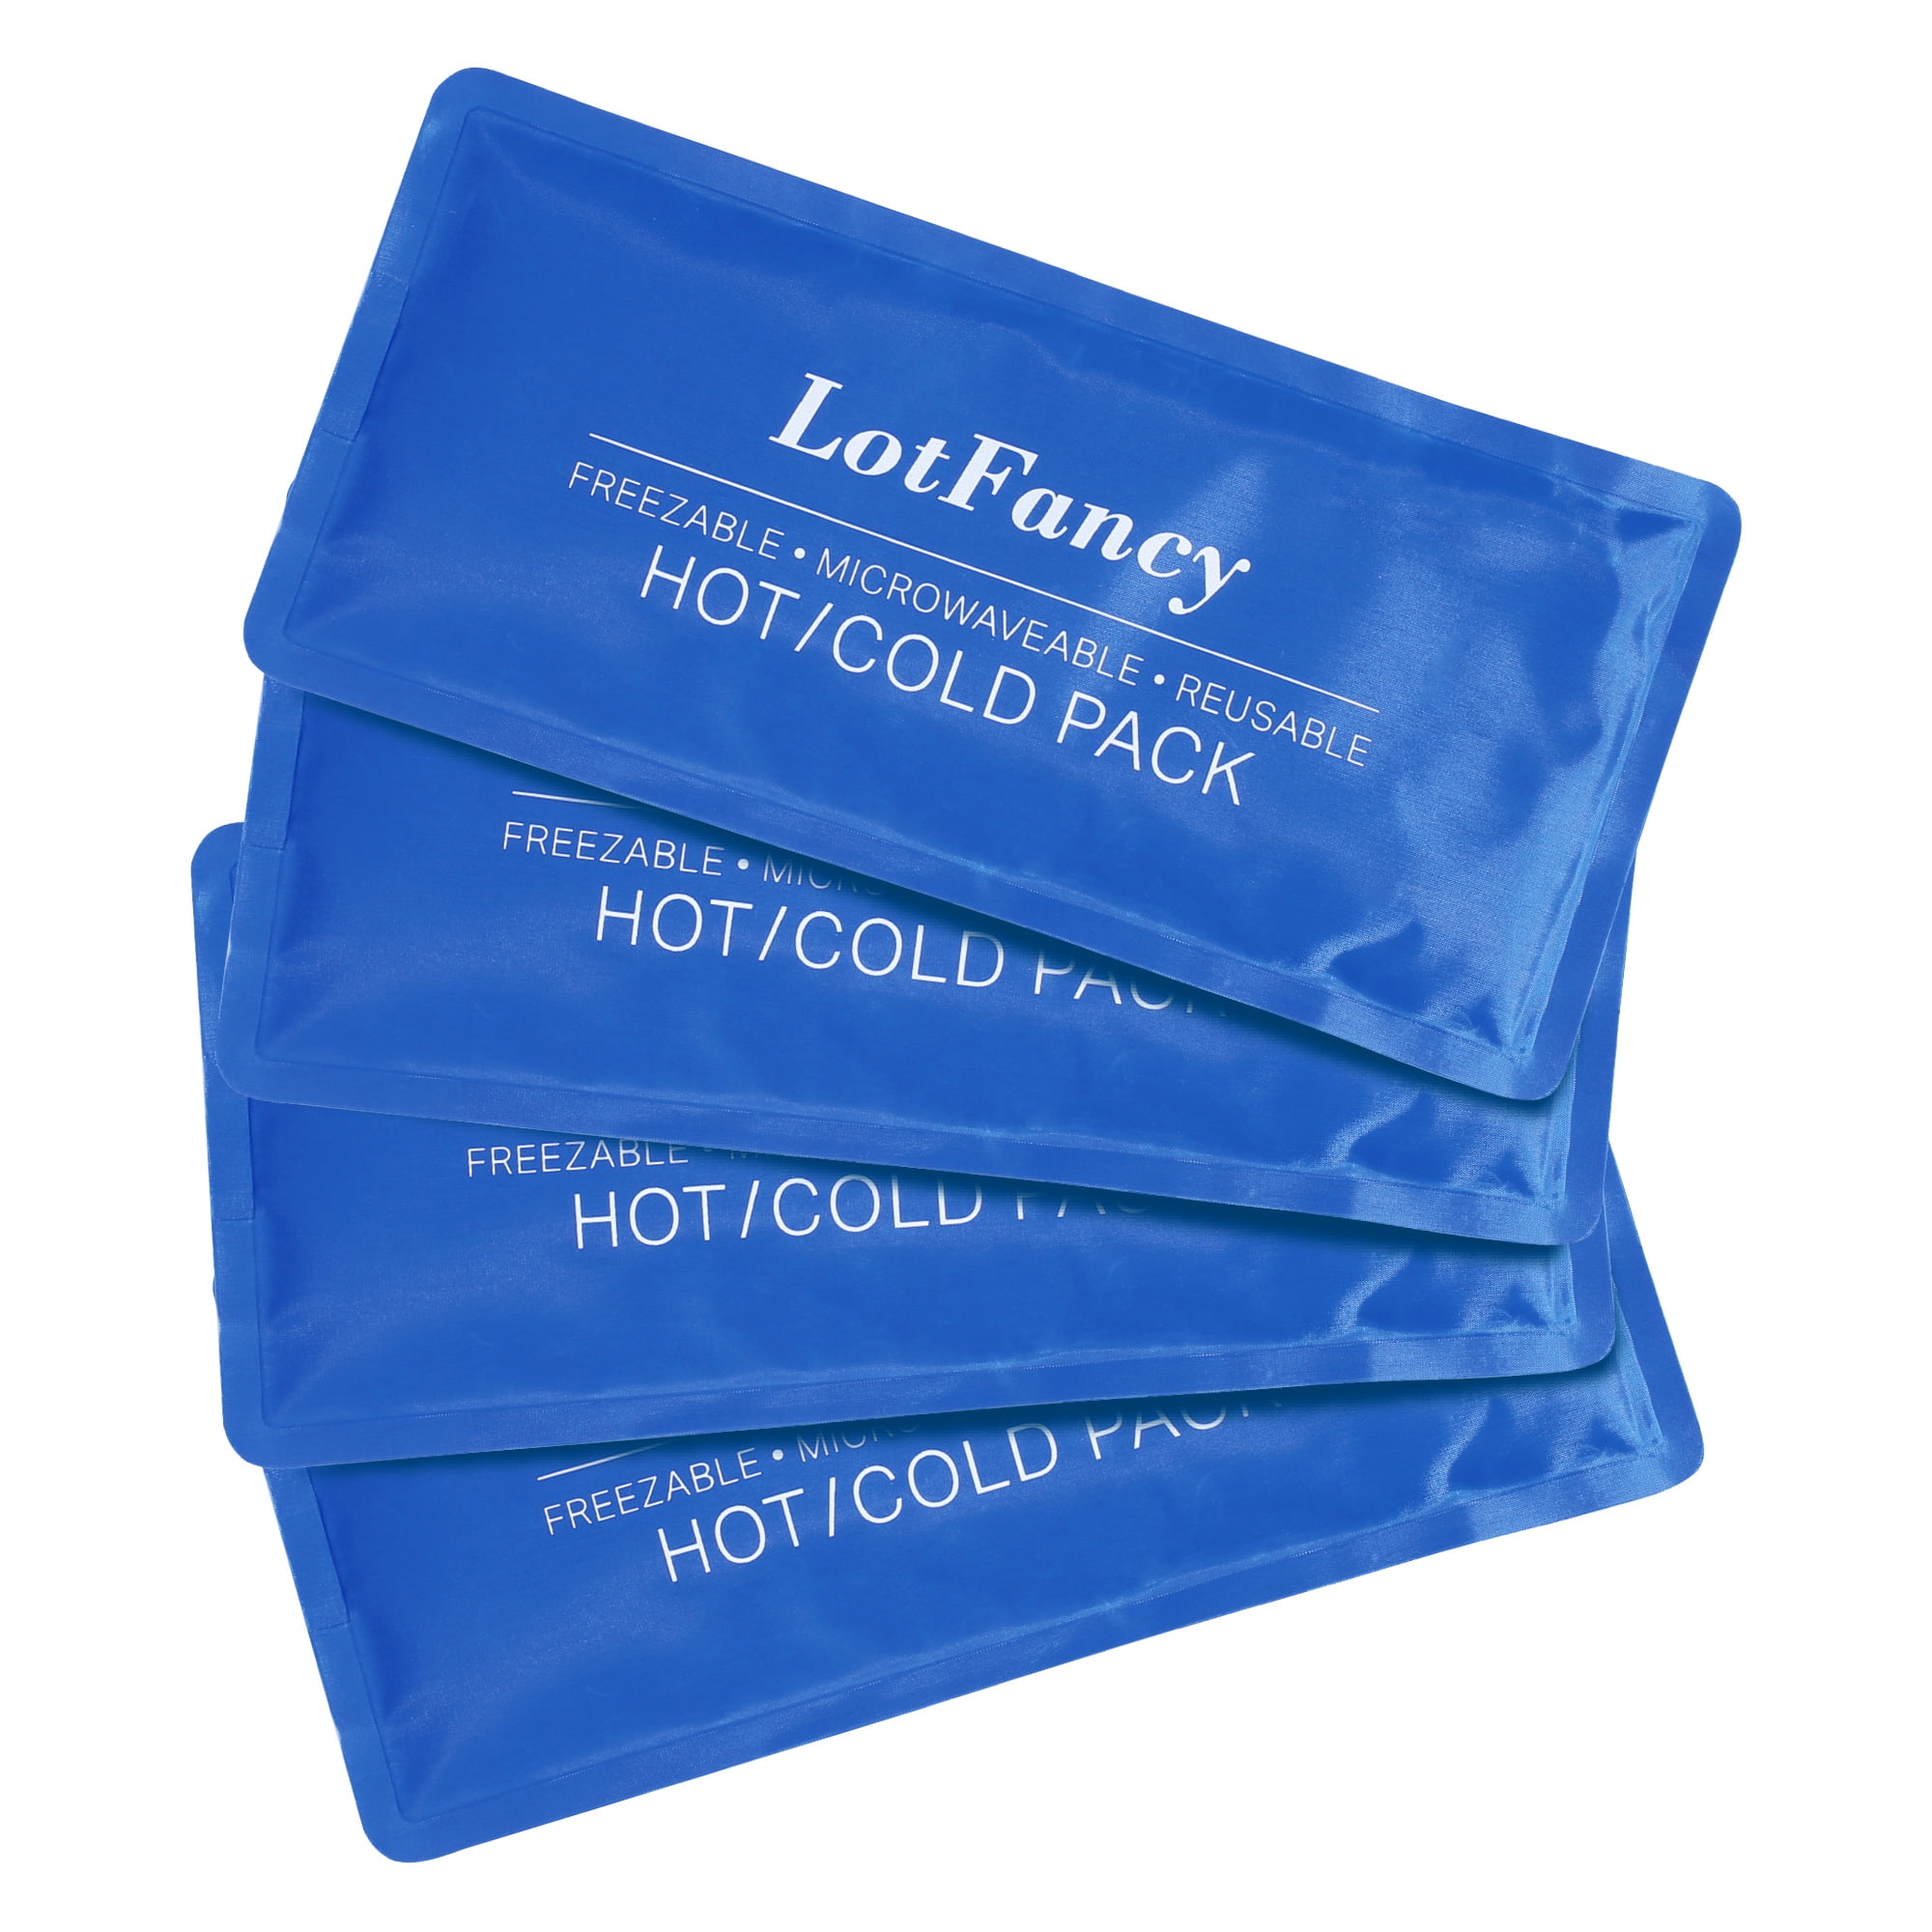 LotFancy Ice Packs for Cooler and Lunch Box, Reusable Freezer Packs for  Lunch Bags, Slim Blue Ice Blocks, Long Lasting, Refreezable Flat Cool Packs